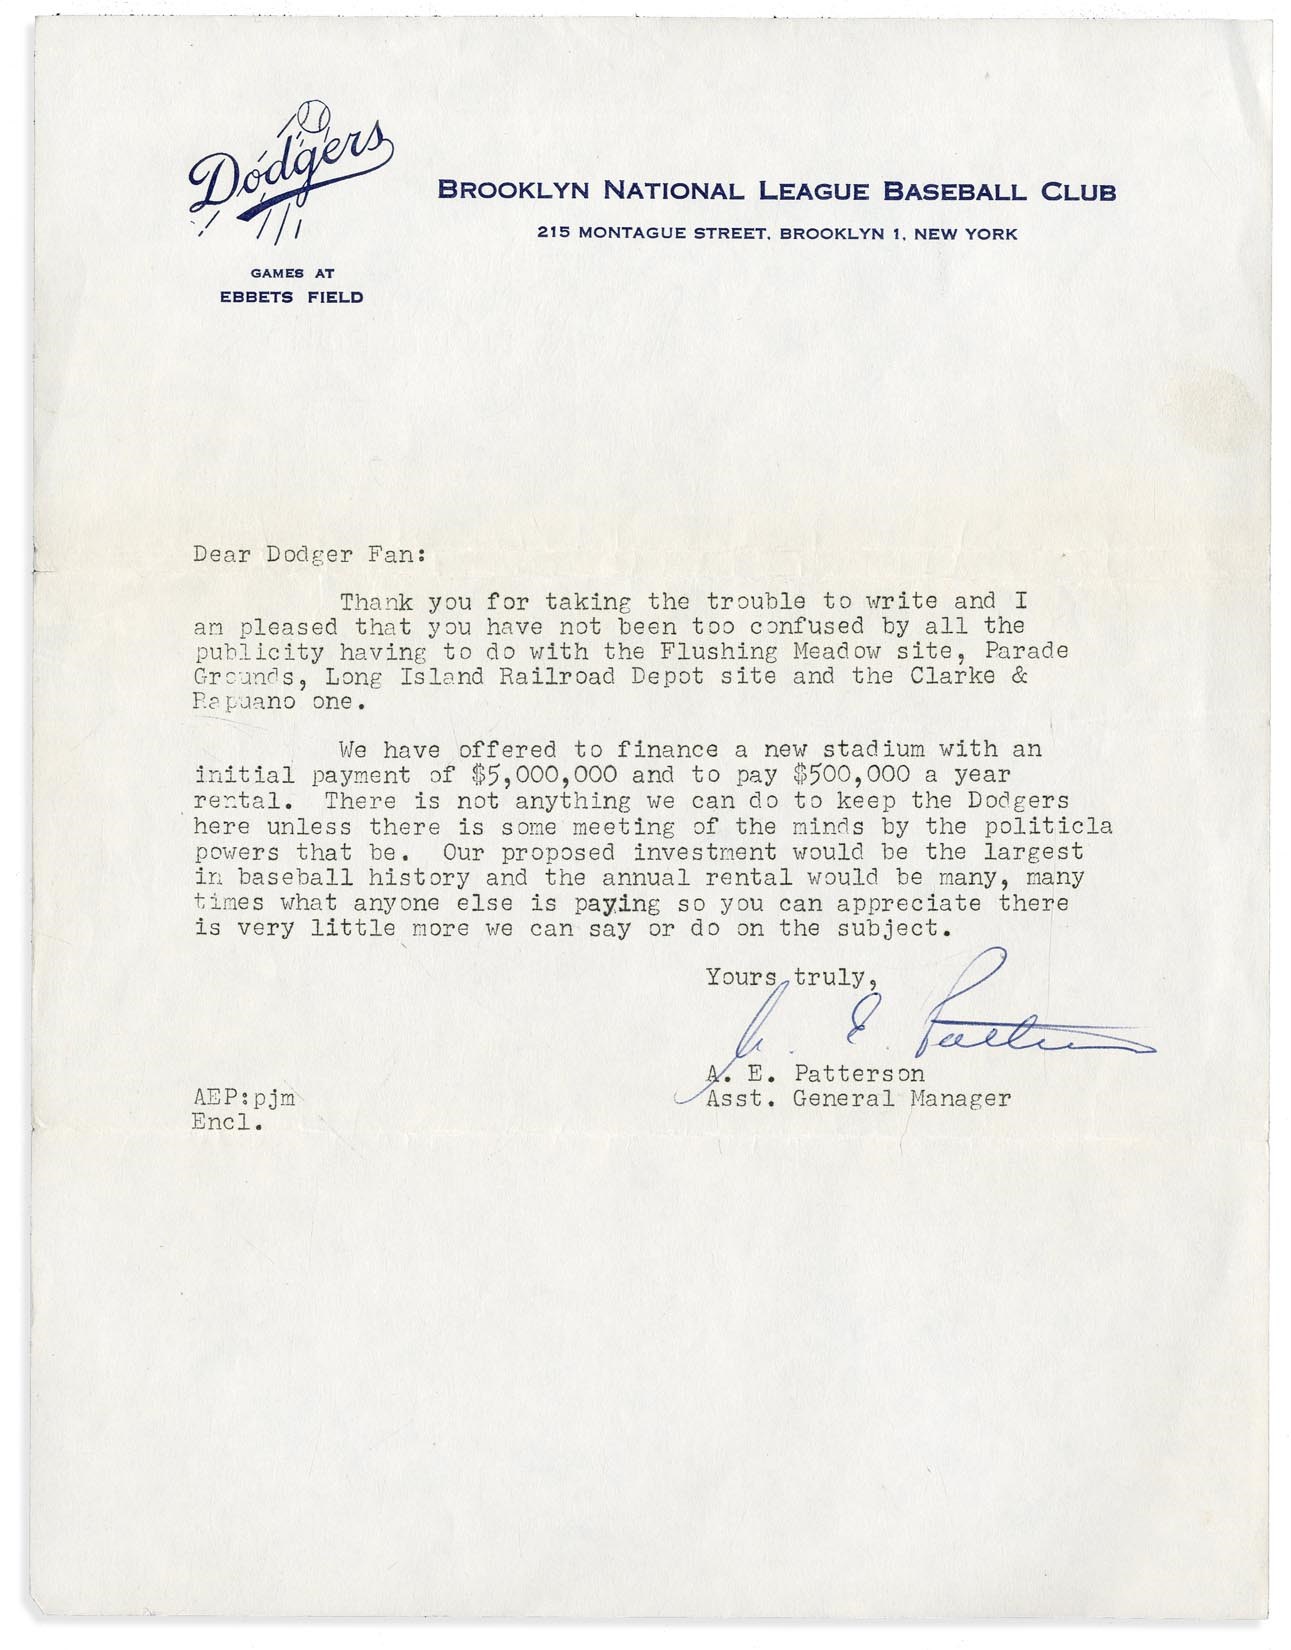 Jackie Robinson & Brooklyn Dodgers - 1957 Dodgers Leaving Brooklyn "Official Announcement" Letter